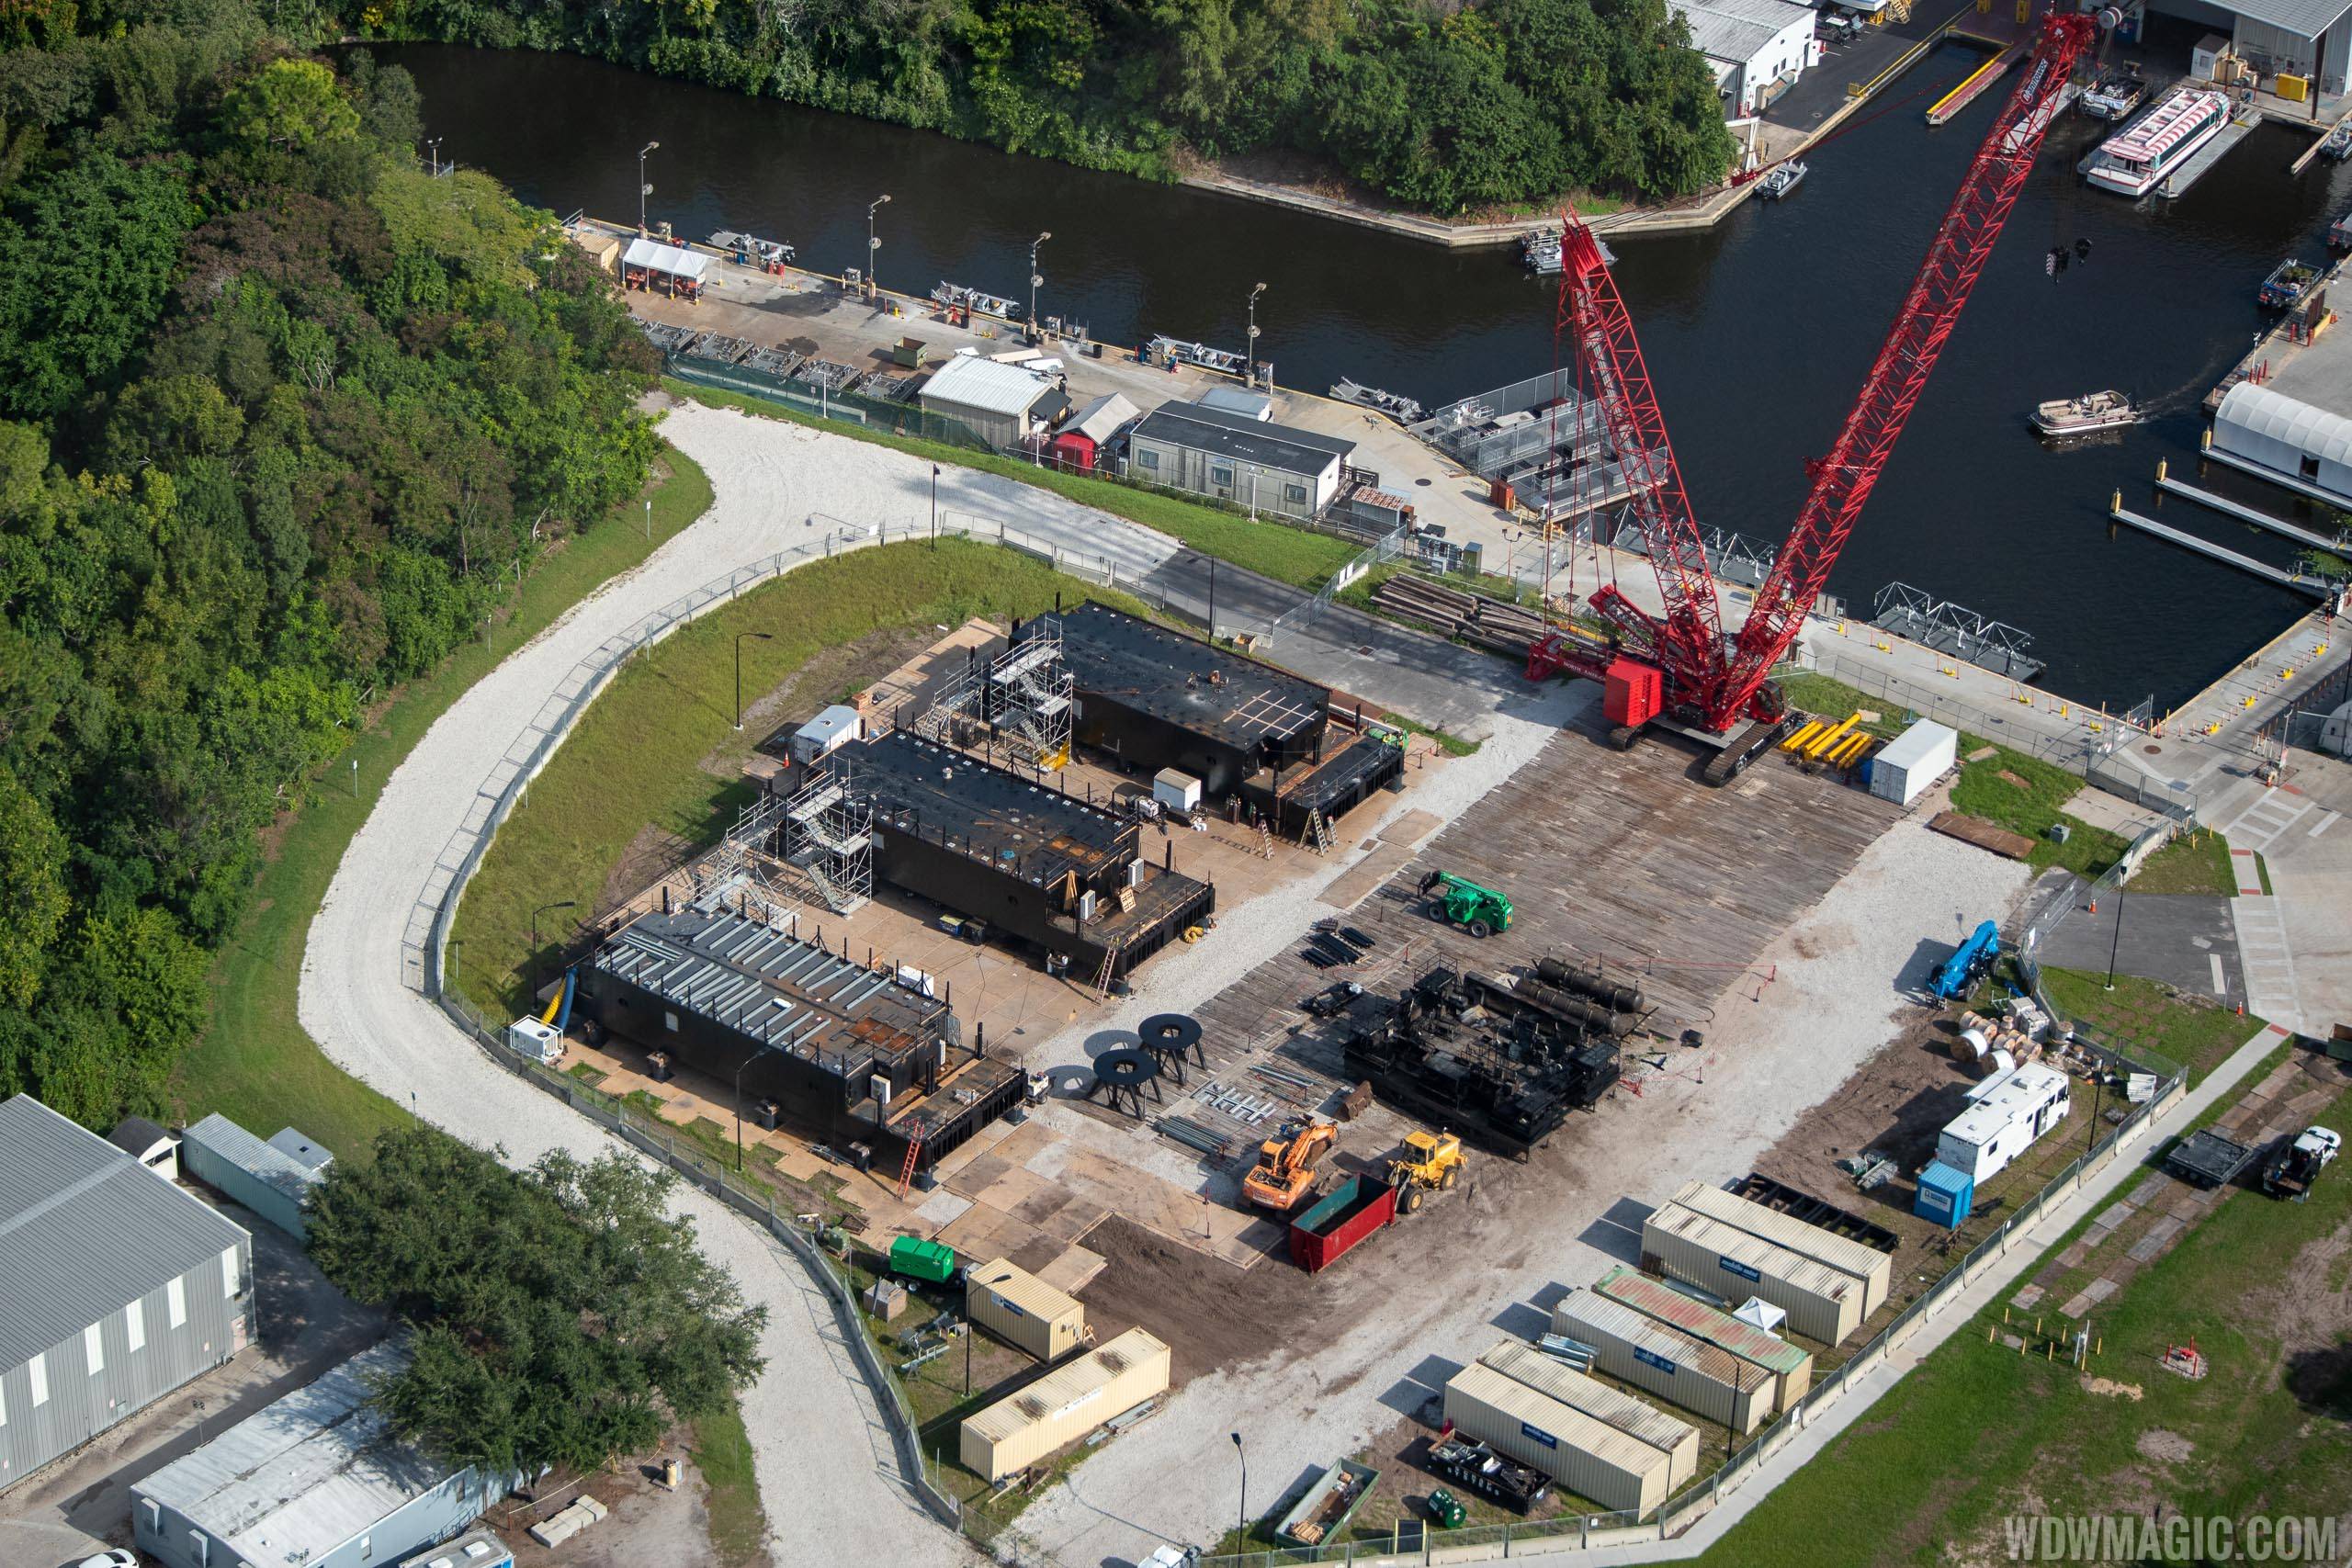 PHOTOS - Barge construction for Epcot's new nighttime show HarmonioUS